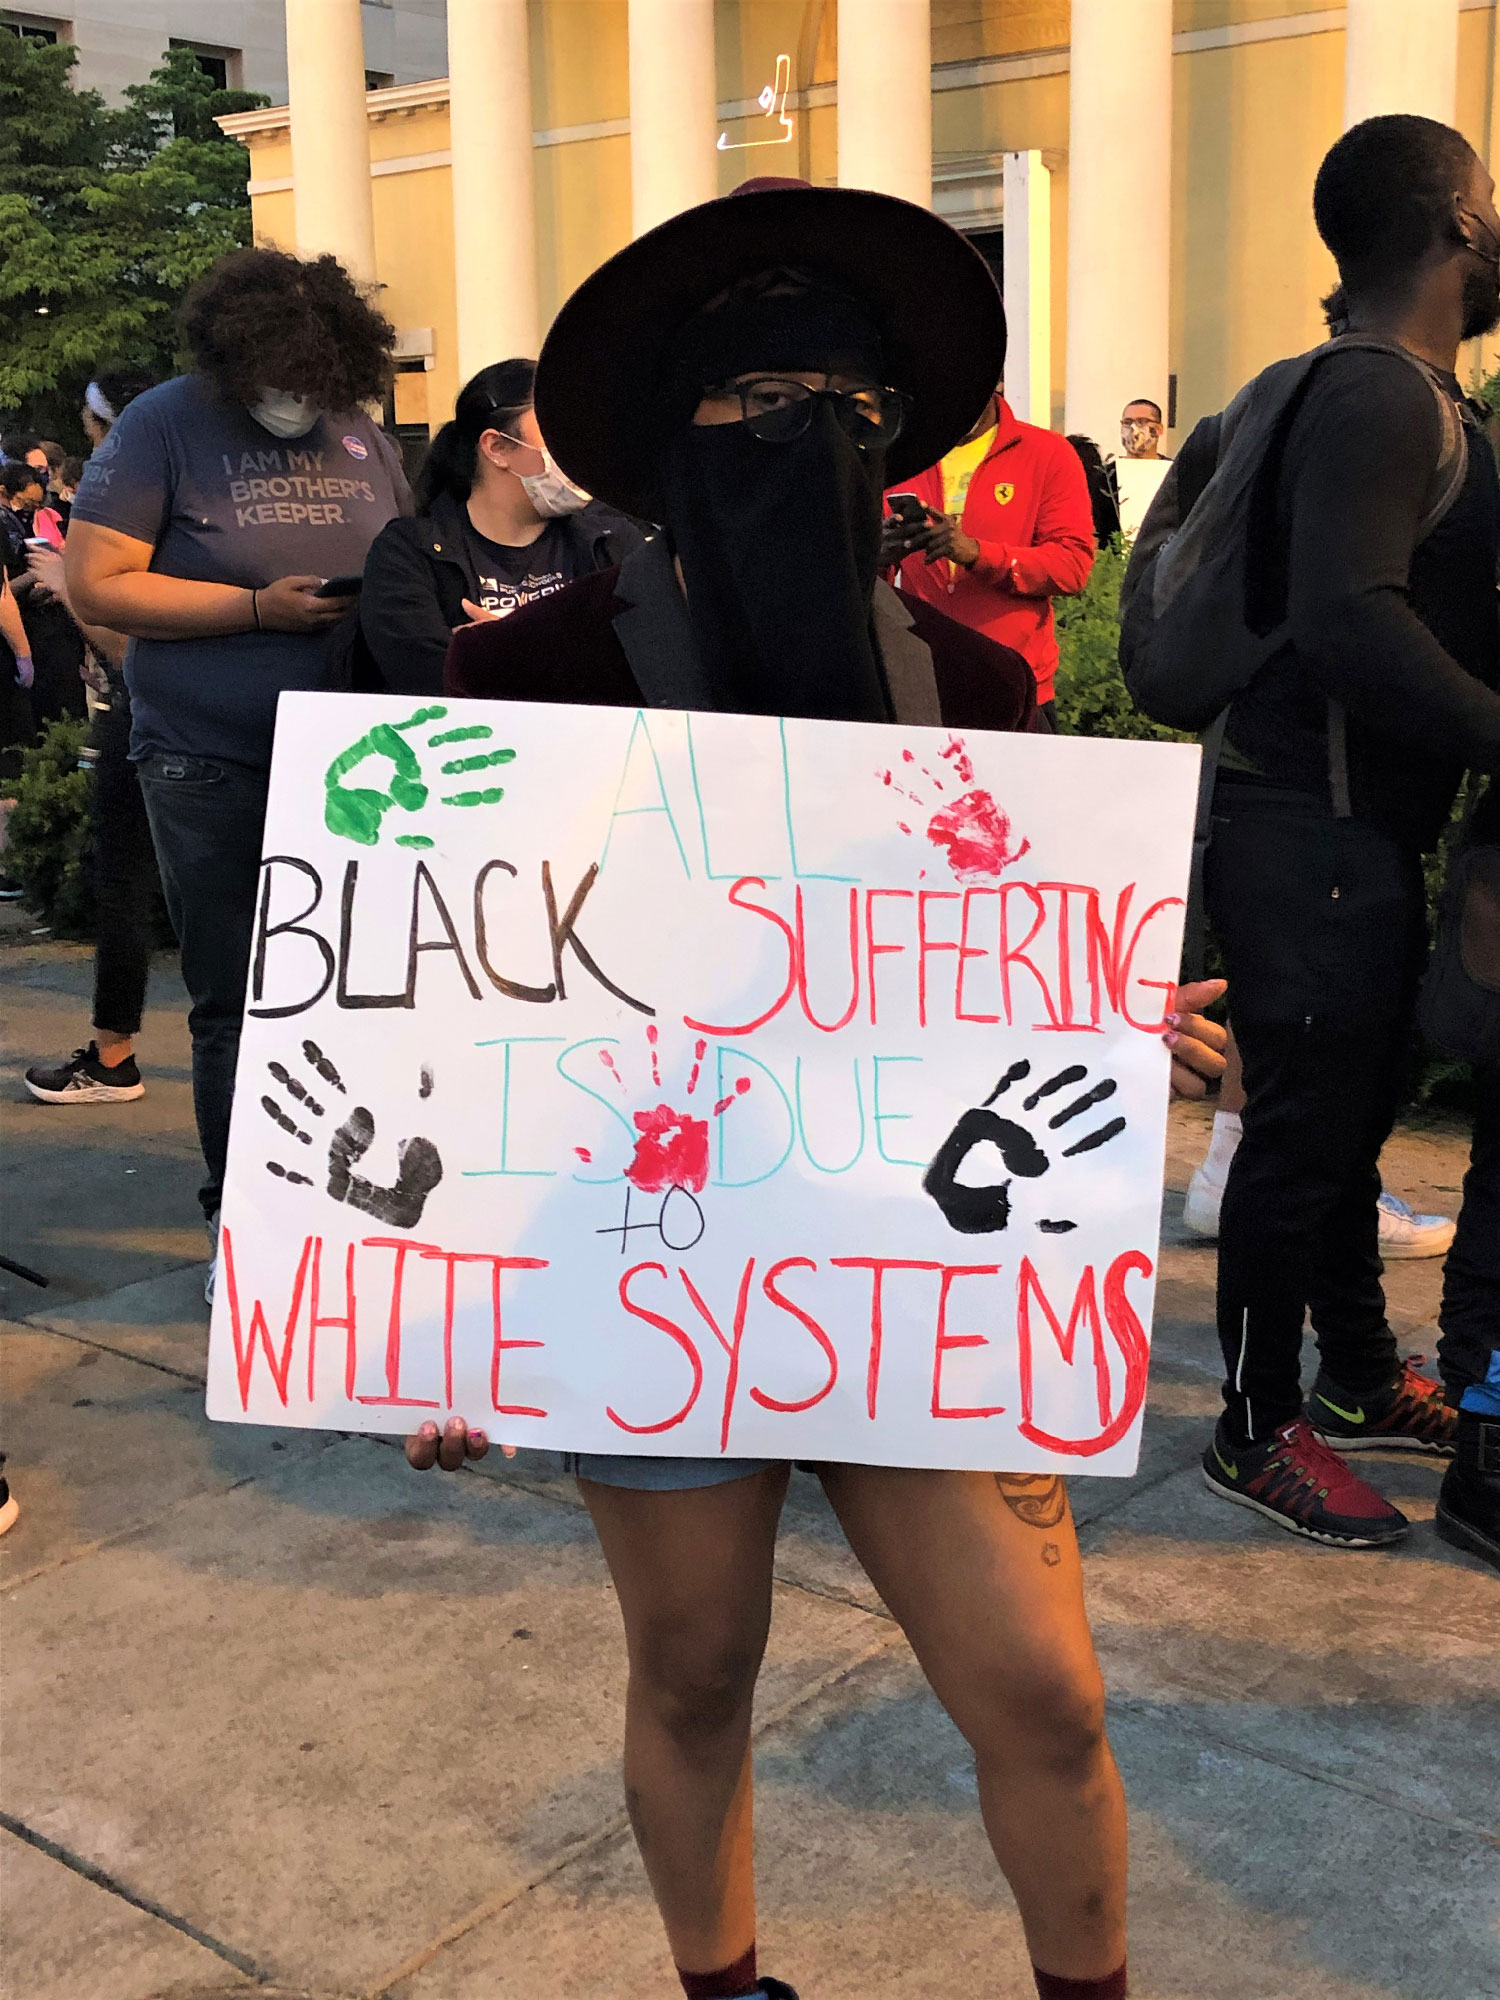 The now worldwide protests against the racially motivated murder of George Floyd have sparked larger conversations of institutional oppression. This sign from June 2 reads, “All Black suffering is due to white systems.” 